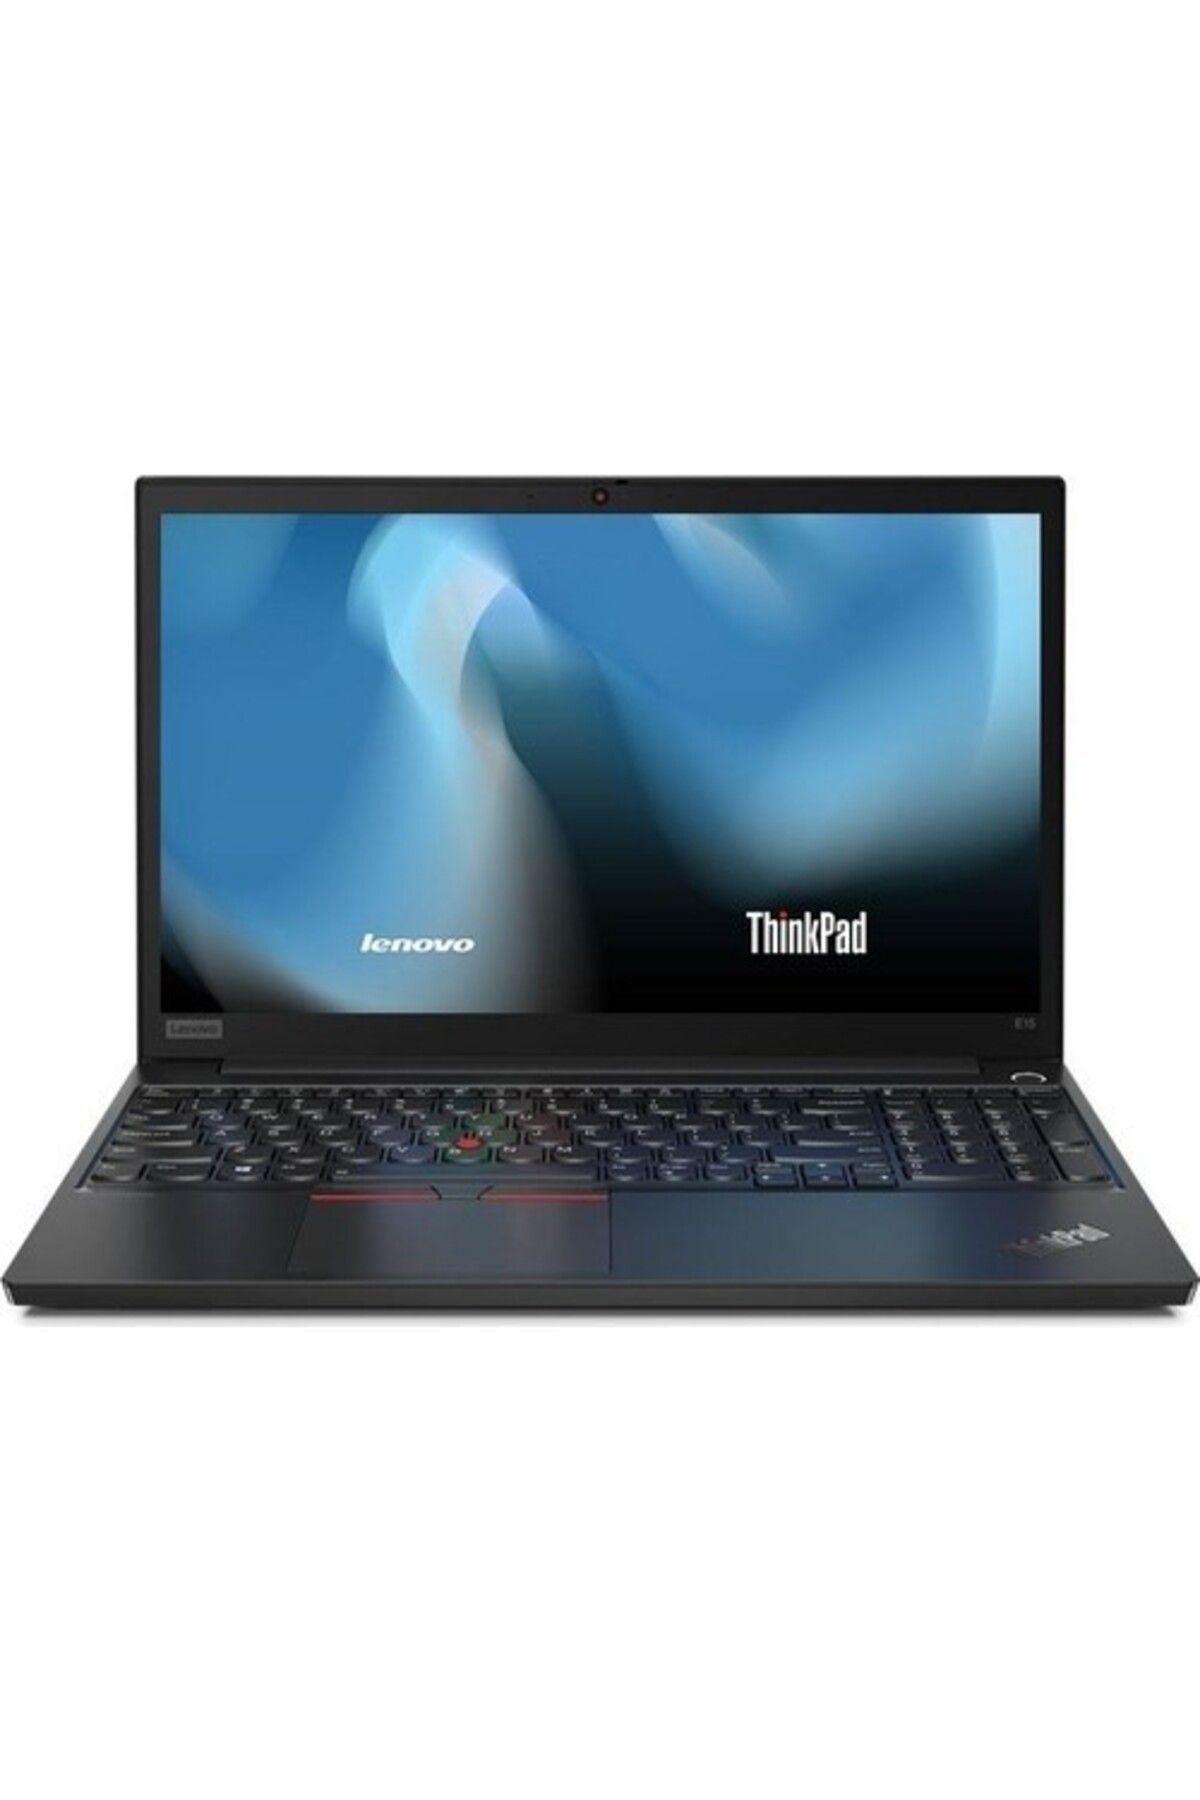 LENOVO ThinkPad E15 G2 21E7S3YGTX i5 1235U 16GB 512GB SSD 2GB MX450 Freedos 15.6" FHD Notebook